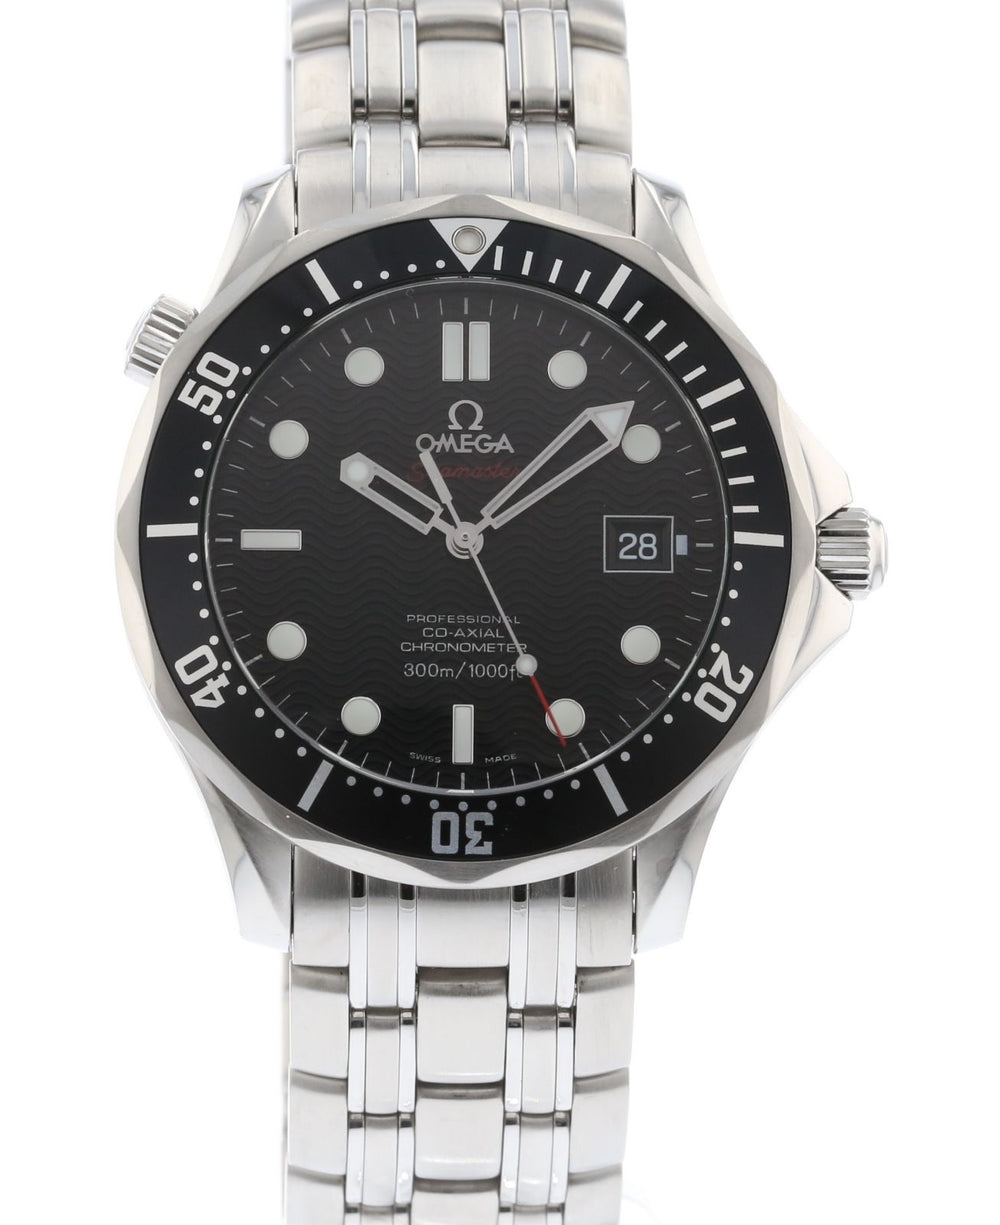 OMEGA Seamaster Diver 300m Co-Axial 212.30.41.20.01.002 1